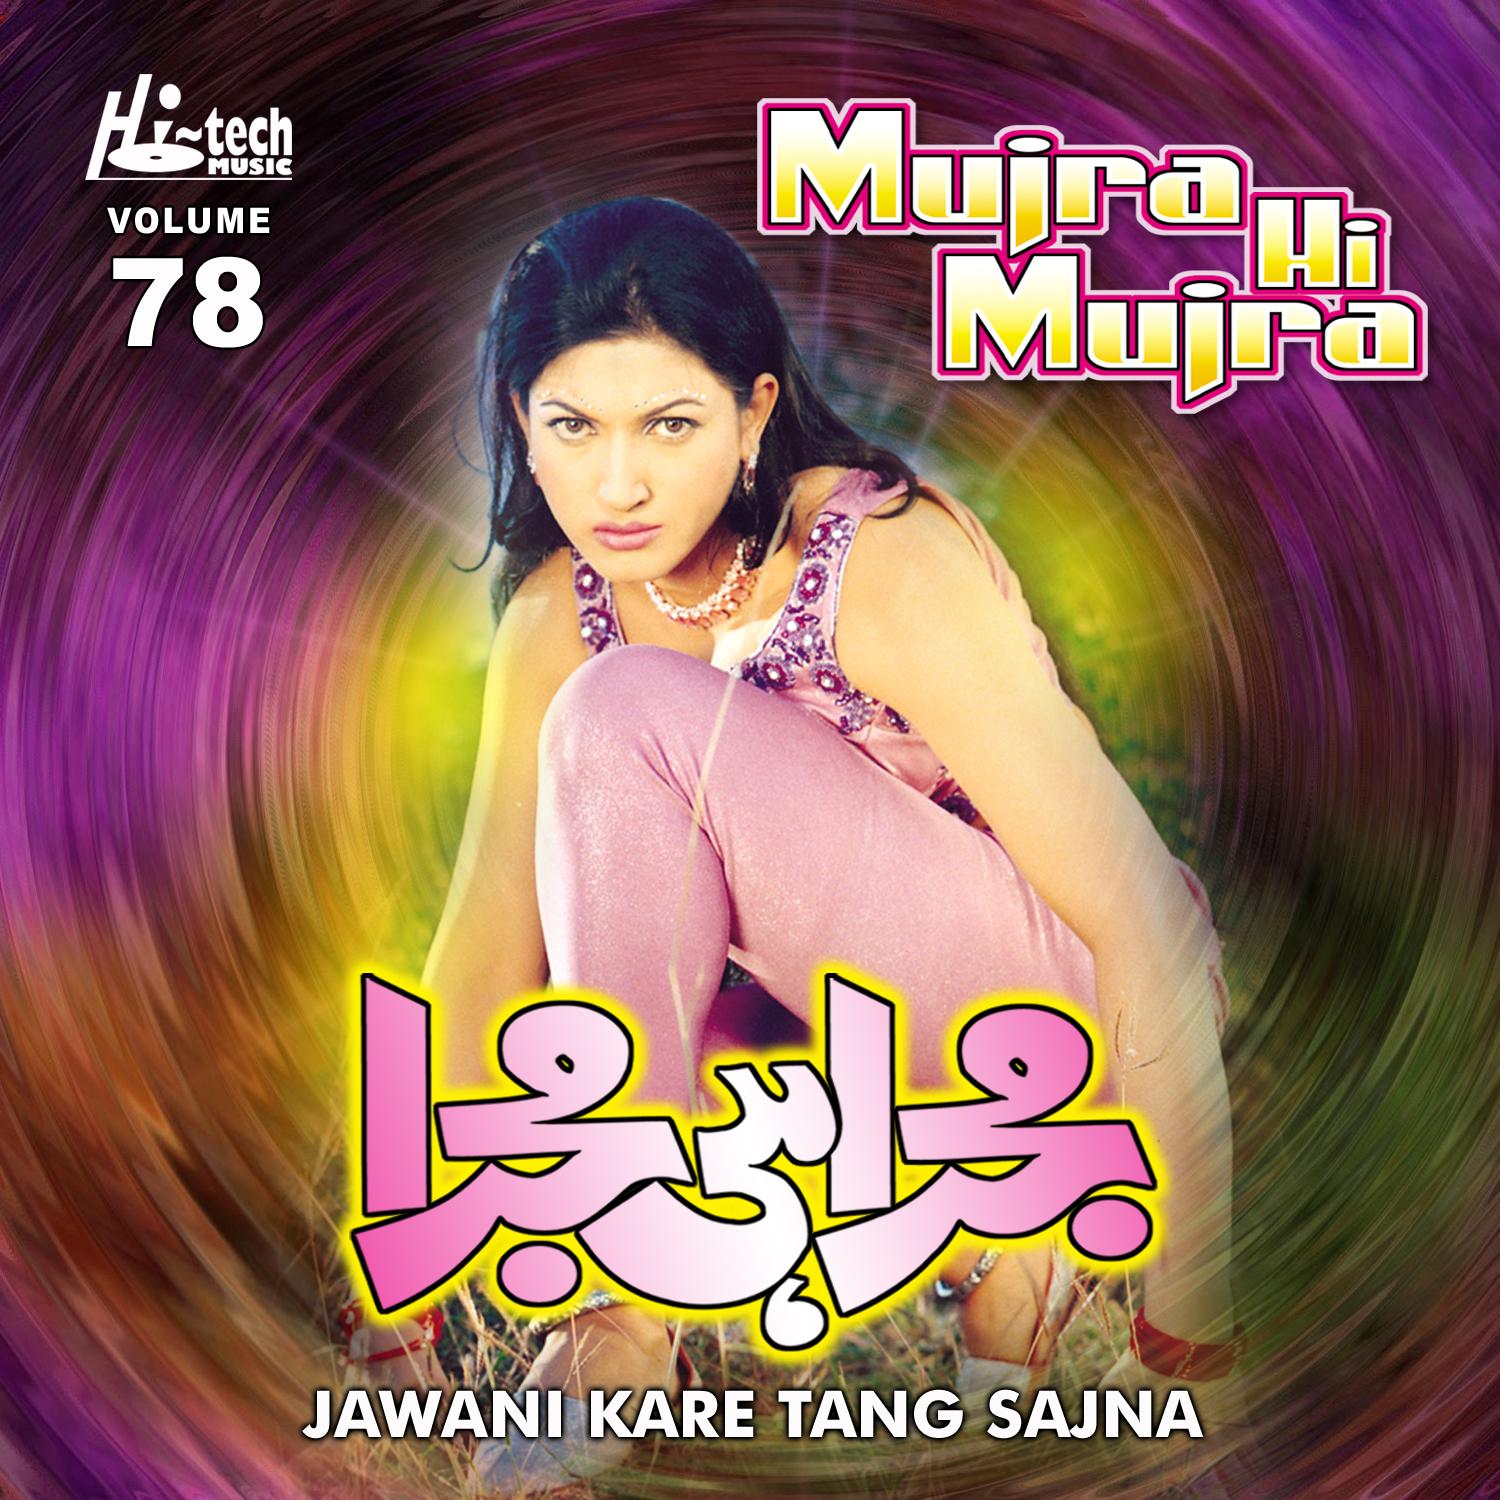 Experience the ultimate musical seduction with Malang Sajna Mp3